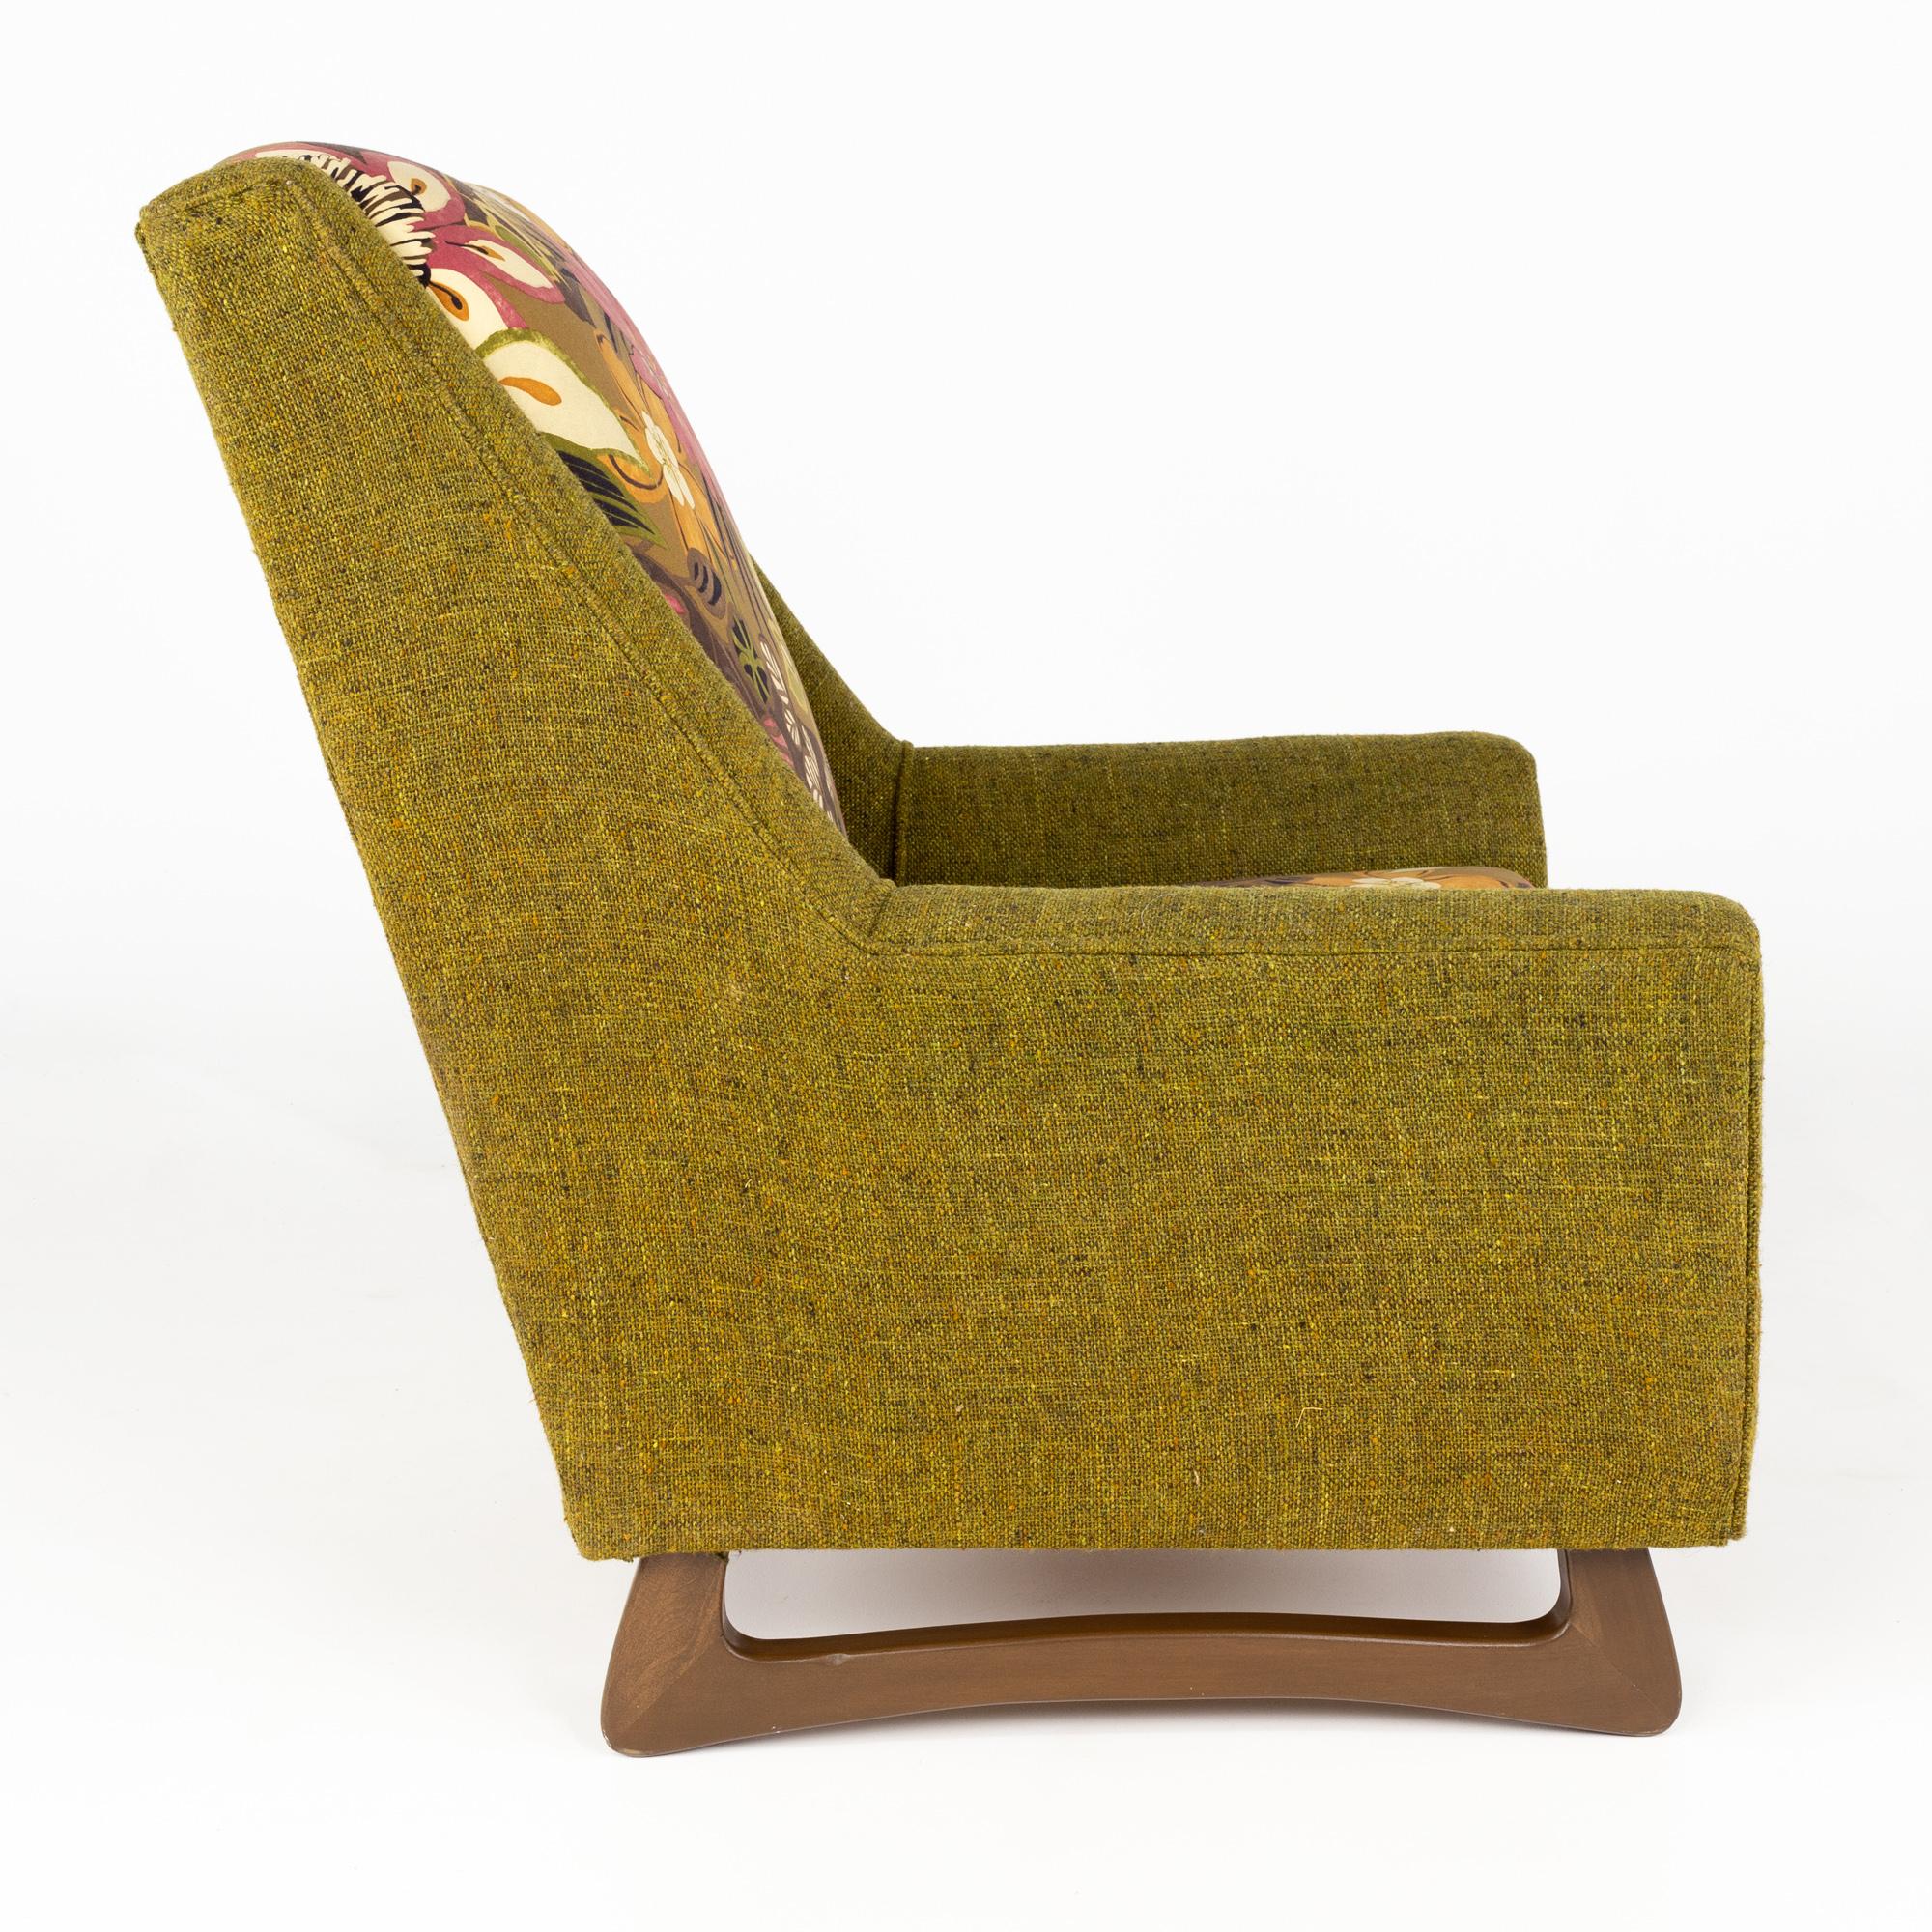 Upholstery Kroehler Adrian Pearsall Style Contemporary Armchair